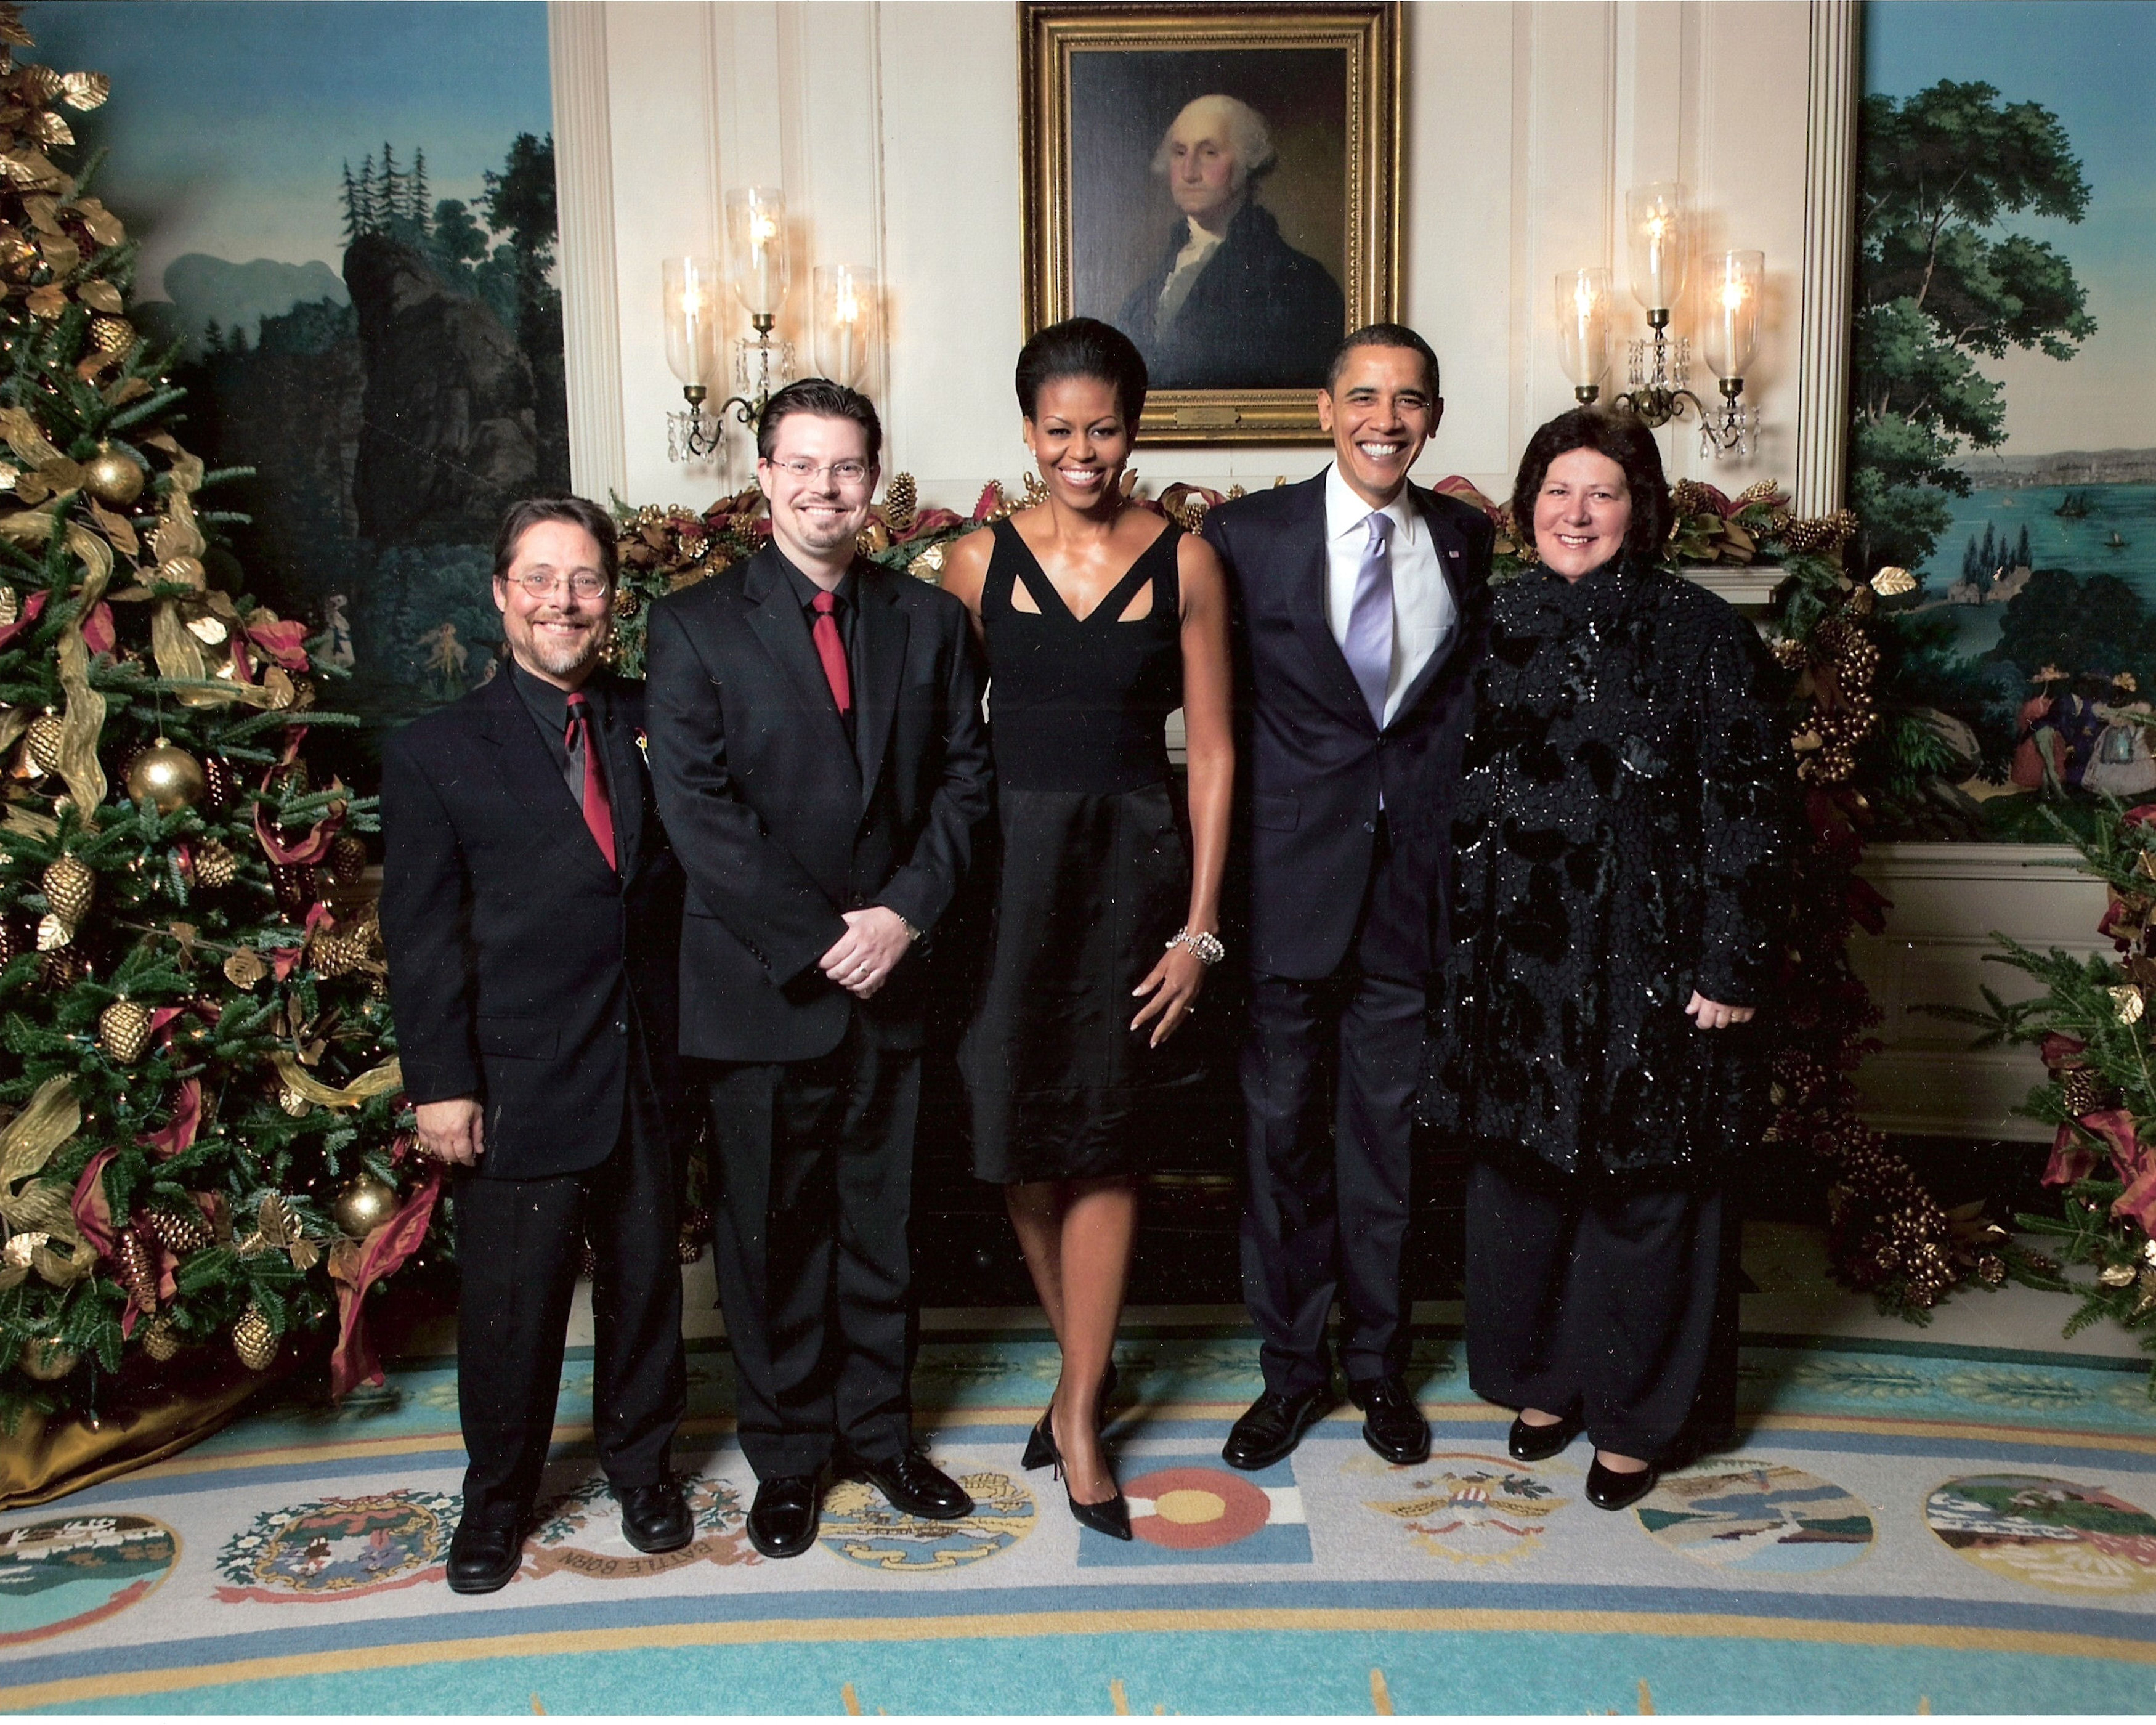 The Brass Roots Trio performed at the White House Christmas Party during the Obama Administration.